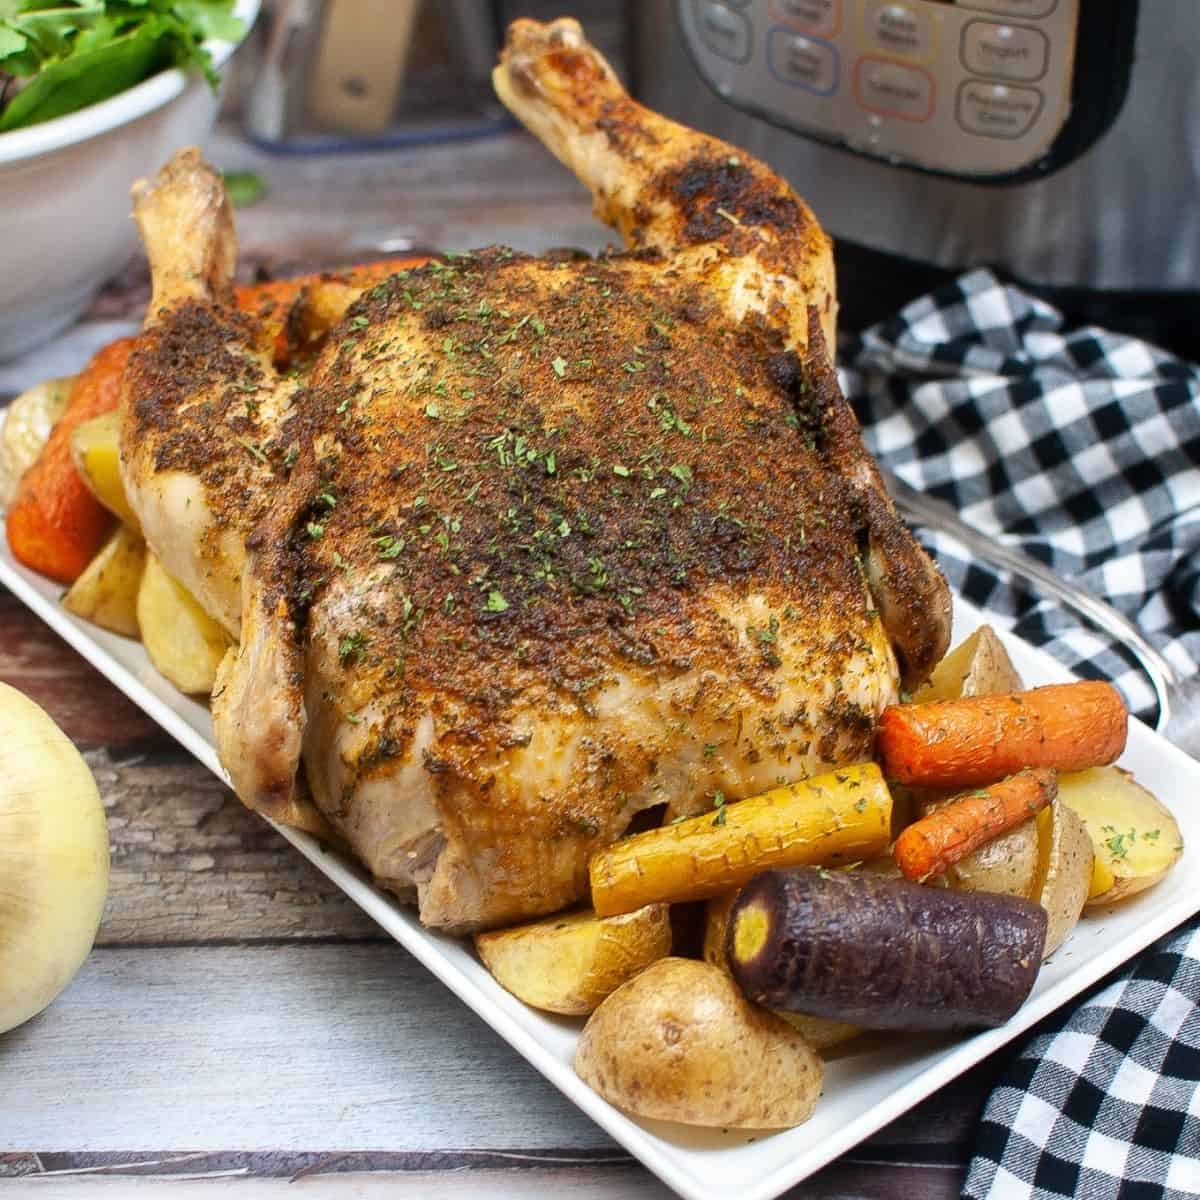 A white platter with a golden brown roast chicken on the platter with roasted carrots, purple carrots and potatoes around the chicken.